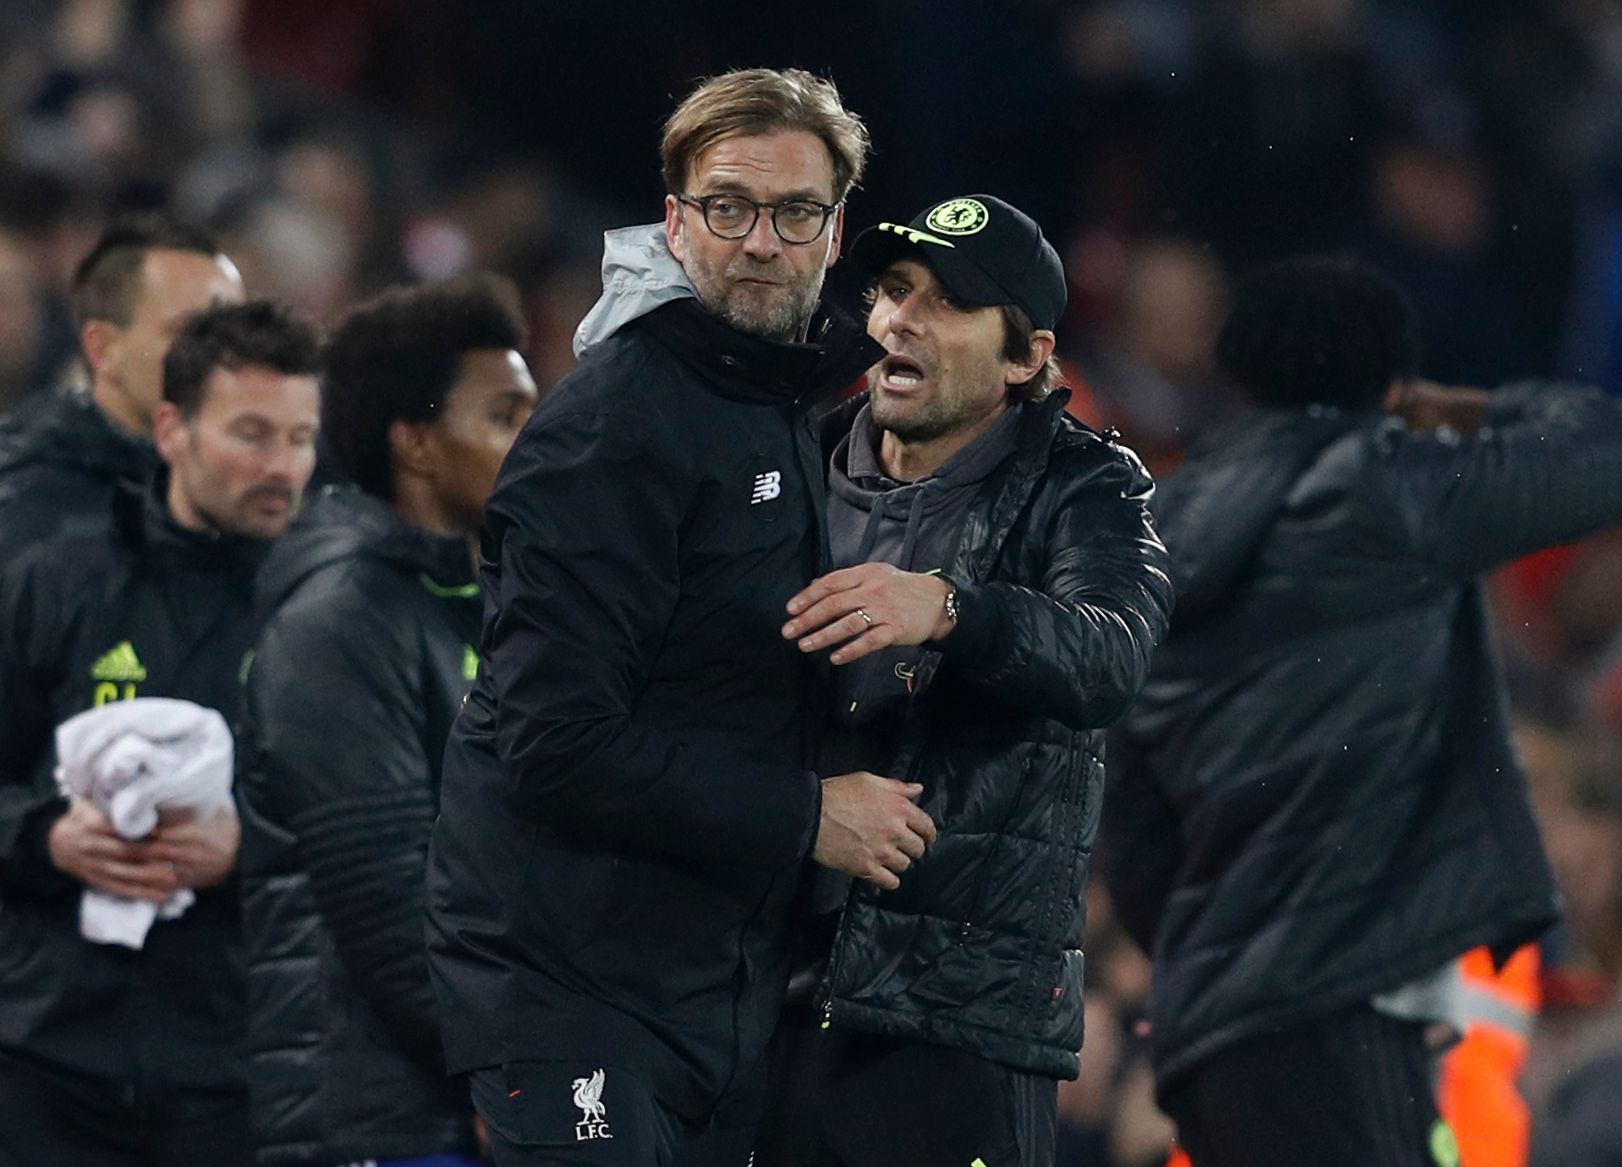 Chelsea manager Antonio Conte and Liverpool manager Juergen Klopp after the game